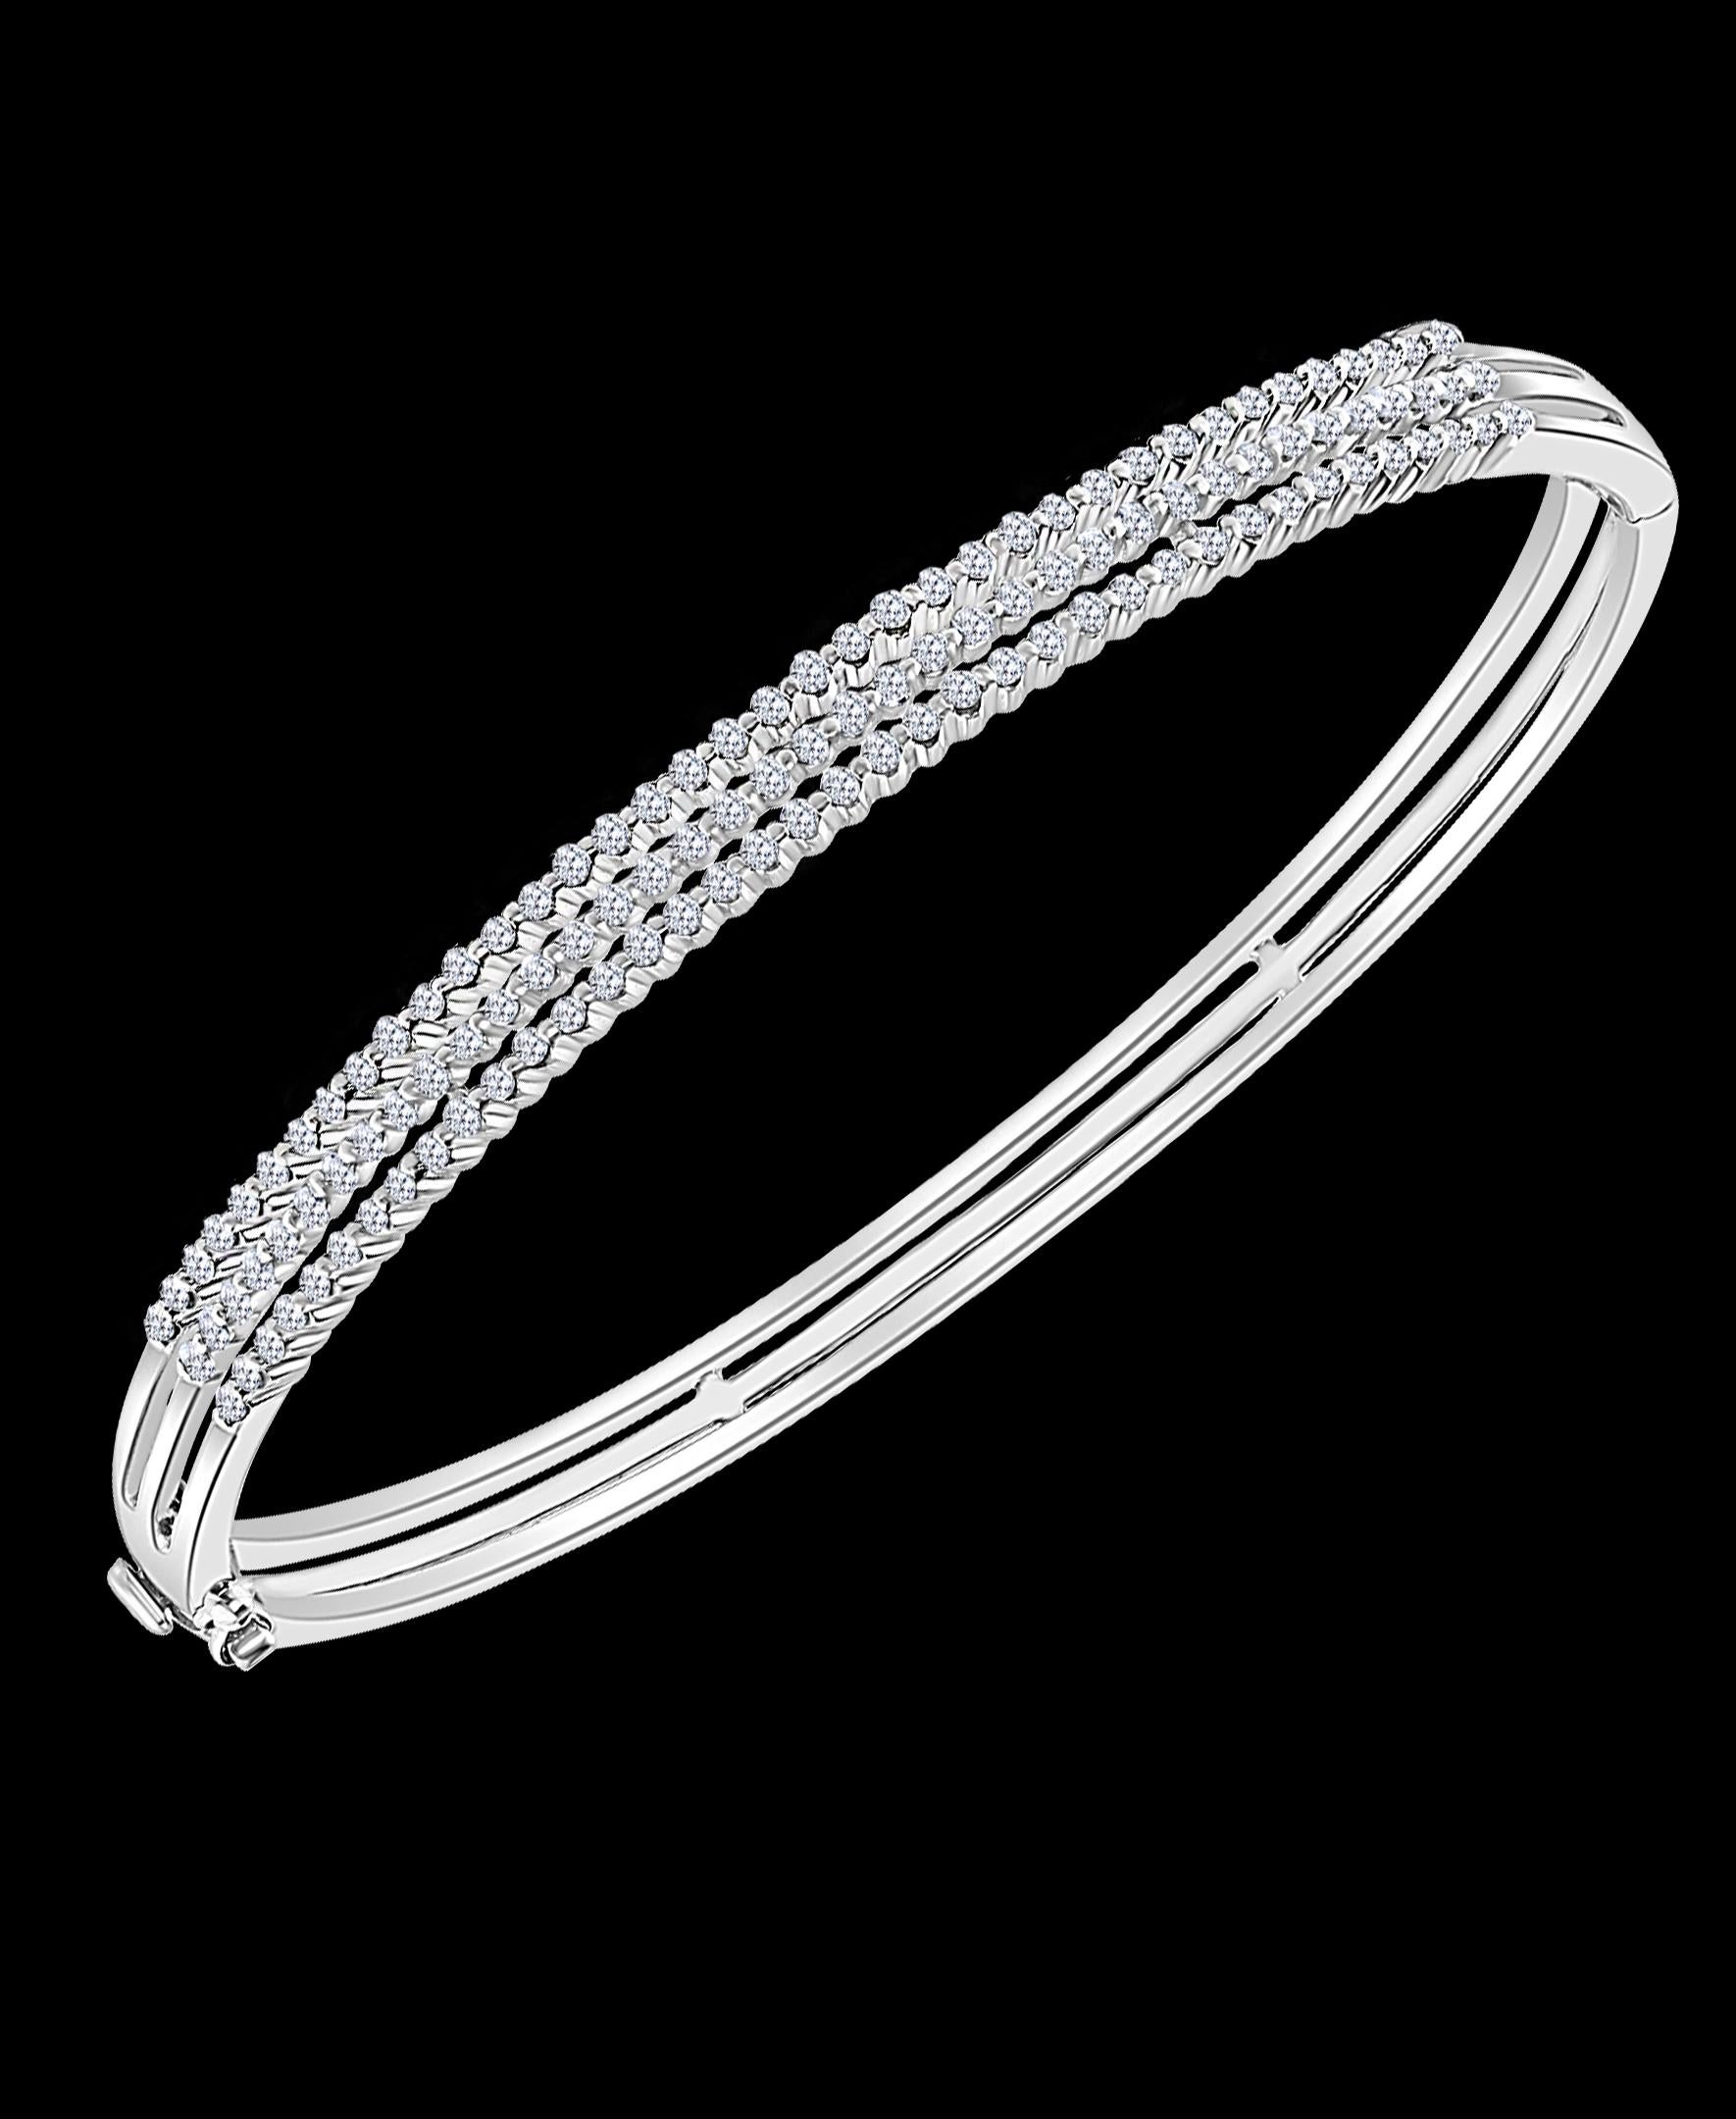 1.3 Carat Diamond Bangle /Bracelet in 18 Karat White Gold 15 Grams
It features a bangle style Bracelet crafted from 18 karat White gold and embedded with total approximately 1.3 Carats with Round brilliant diamonds . 
Three Rows of diamonds.
Open